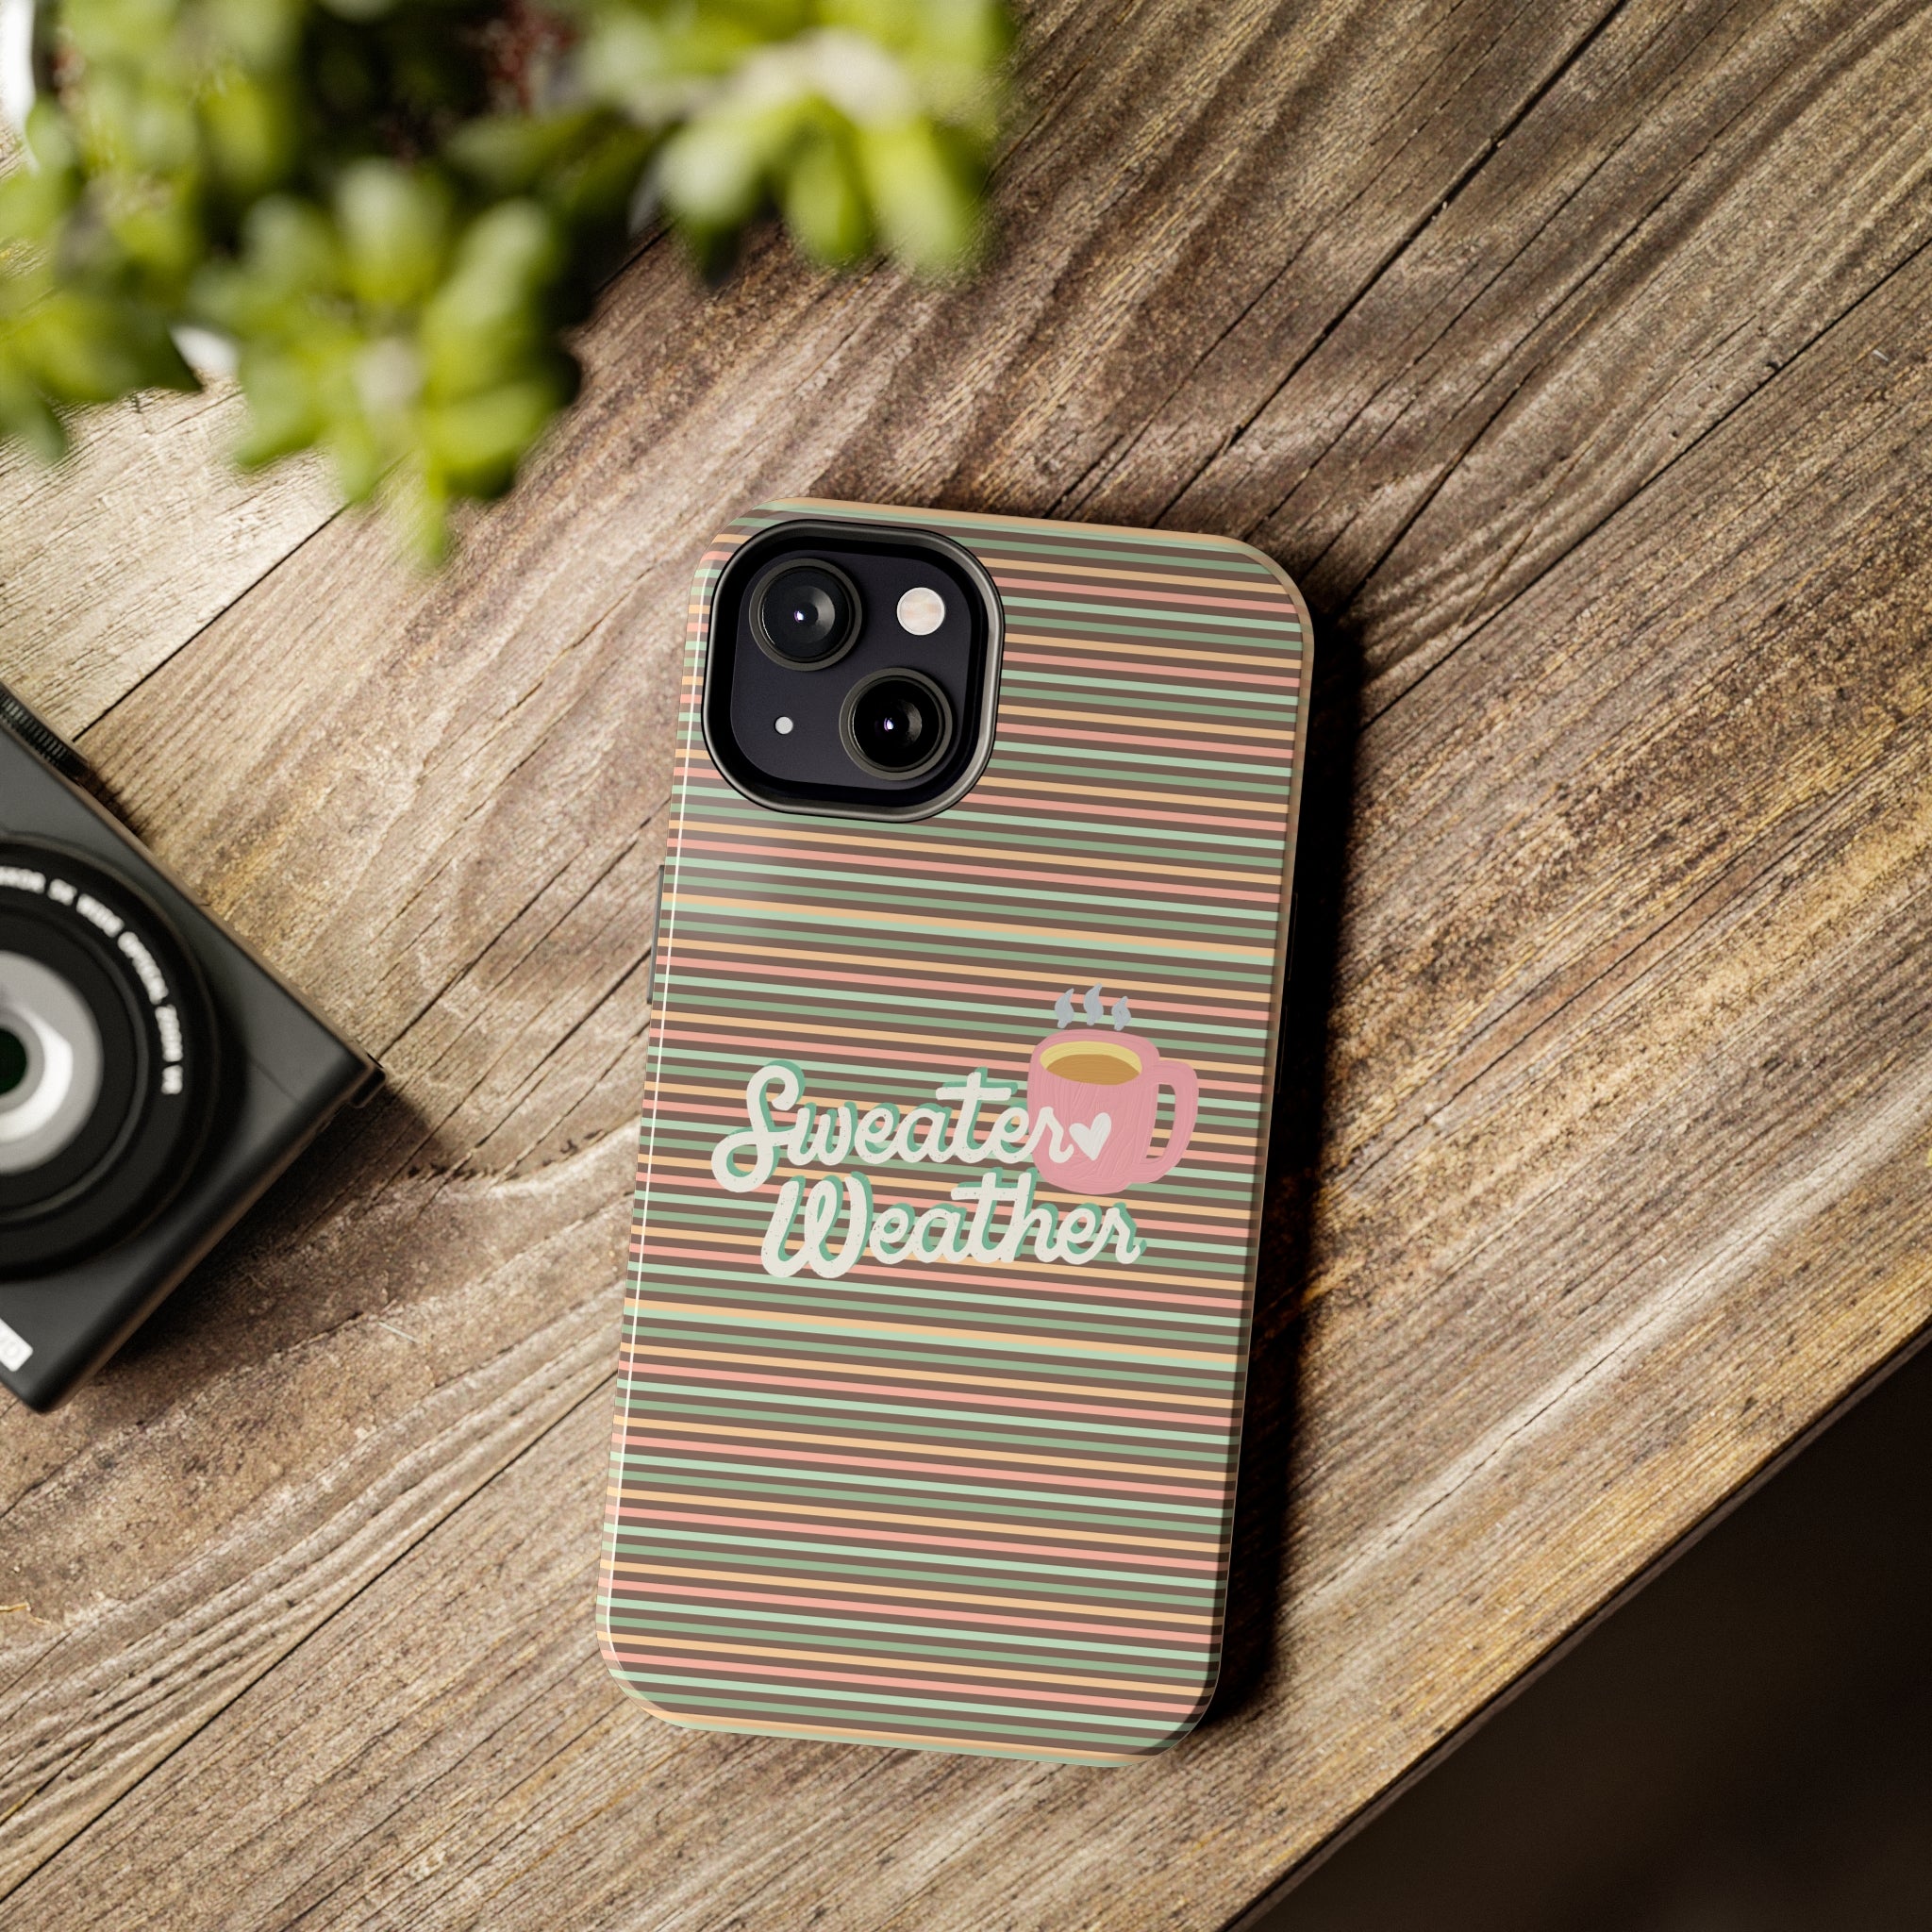 Sweater Weather -  Tough iPhone Cases - 21 Sizes